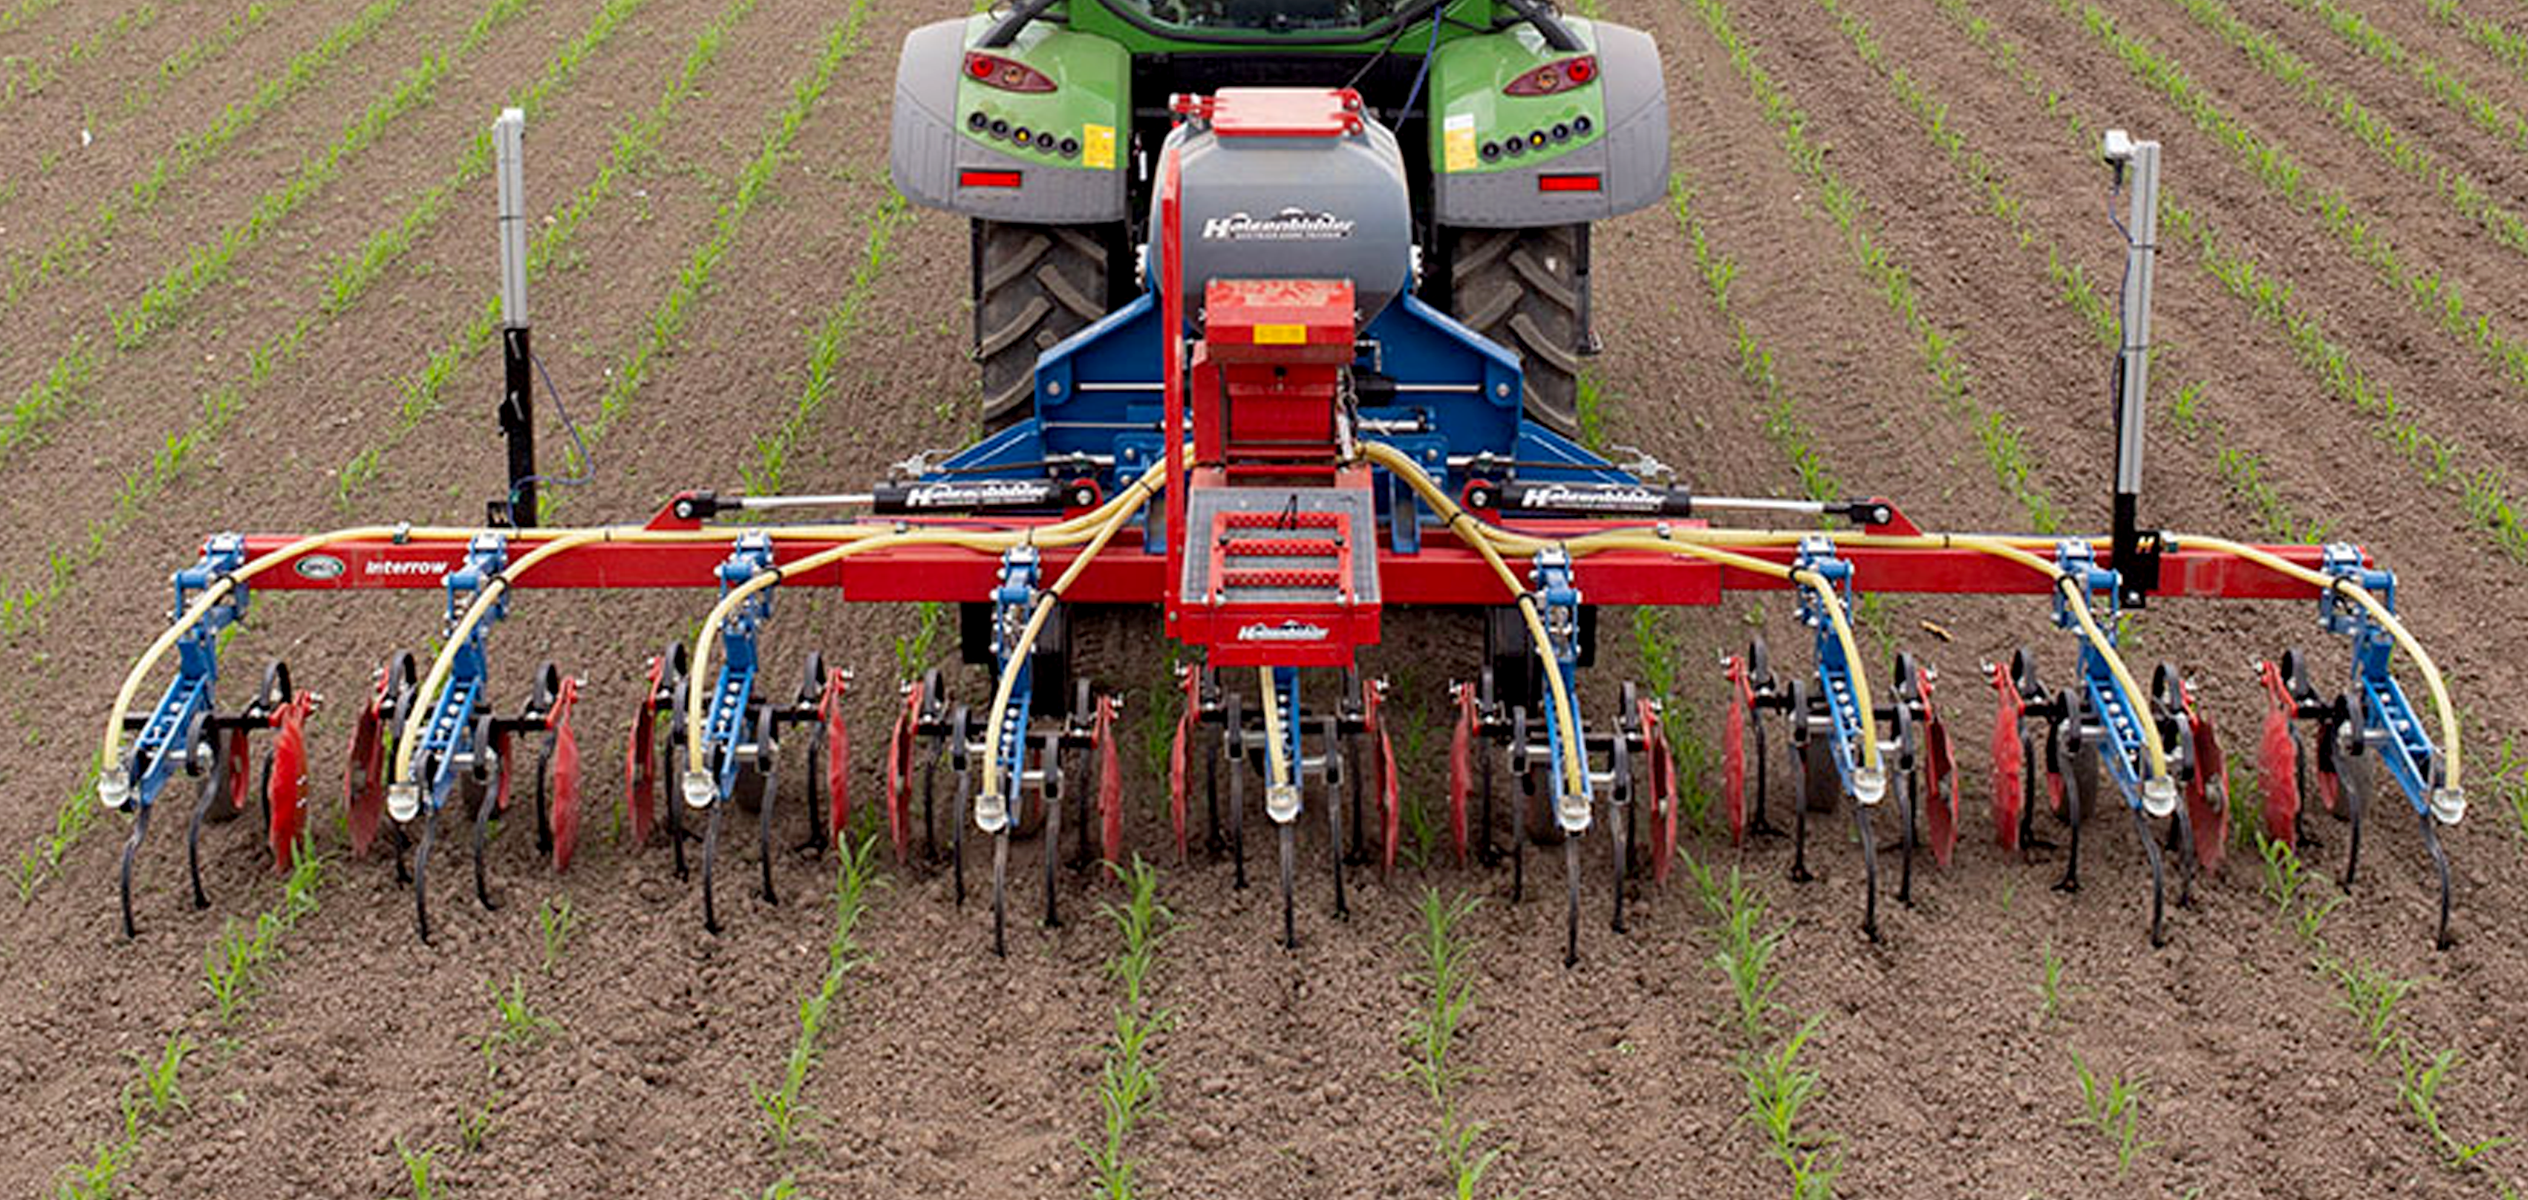 OPCO Inter-Row Cultivator with OPICO Air Seeder, in Maize